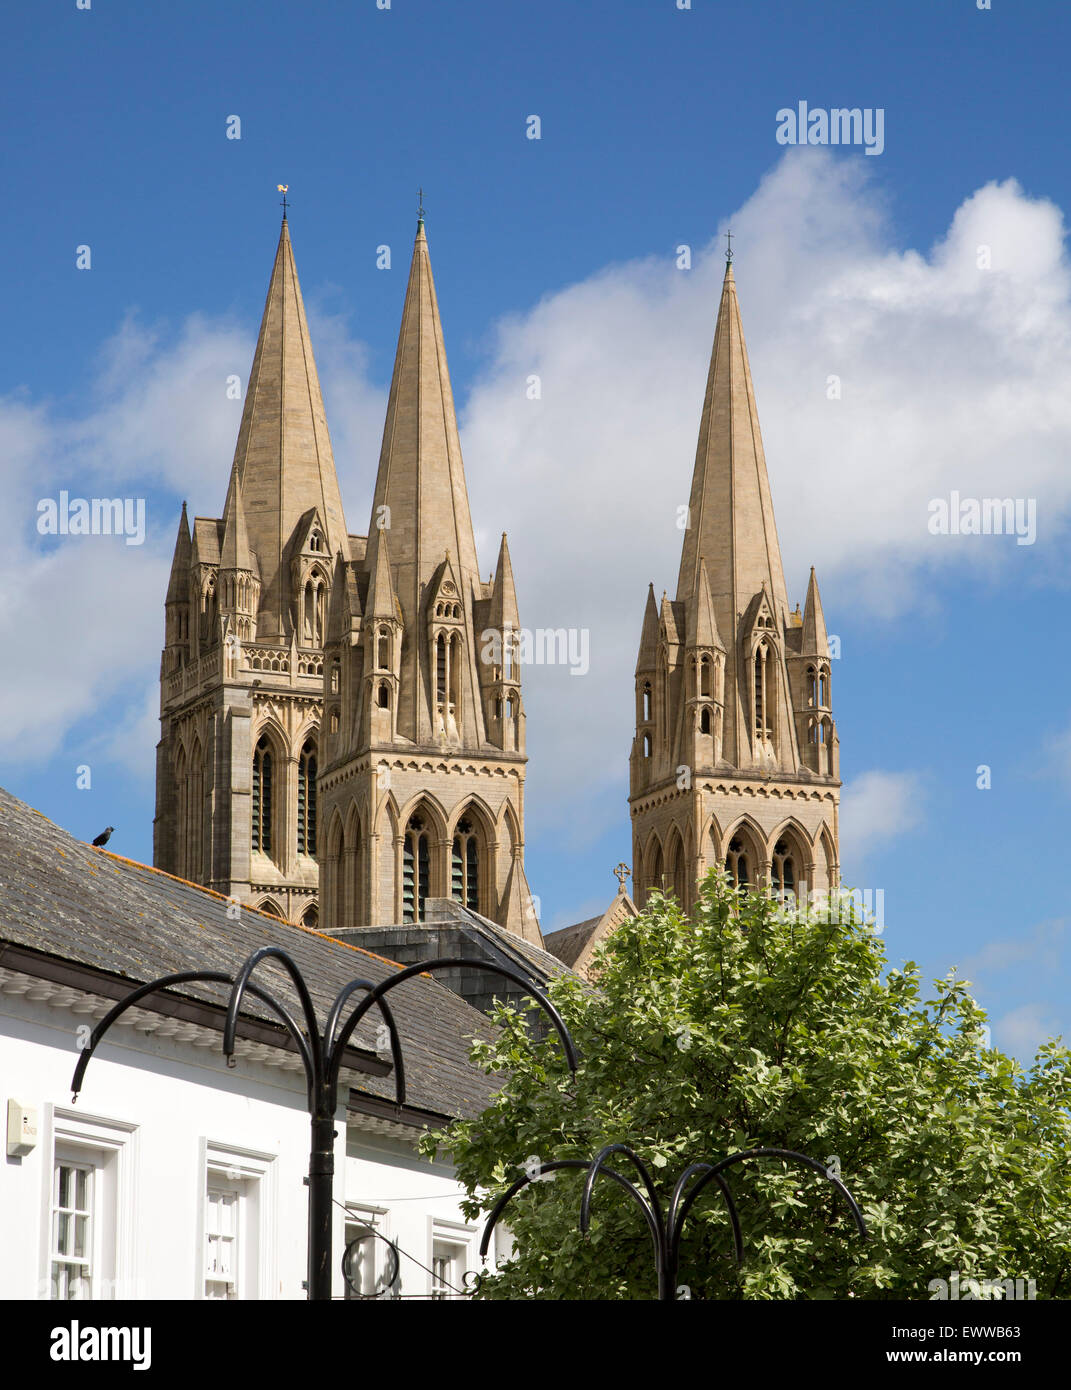 Spires of cathedral rise above historic city centre buildings, Truro, Cornwall, England, UK Stock Photo